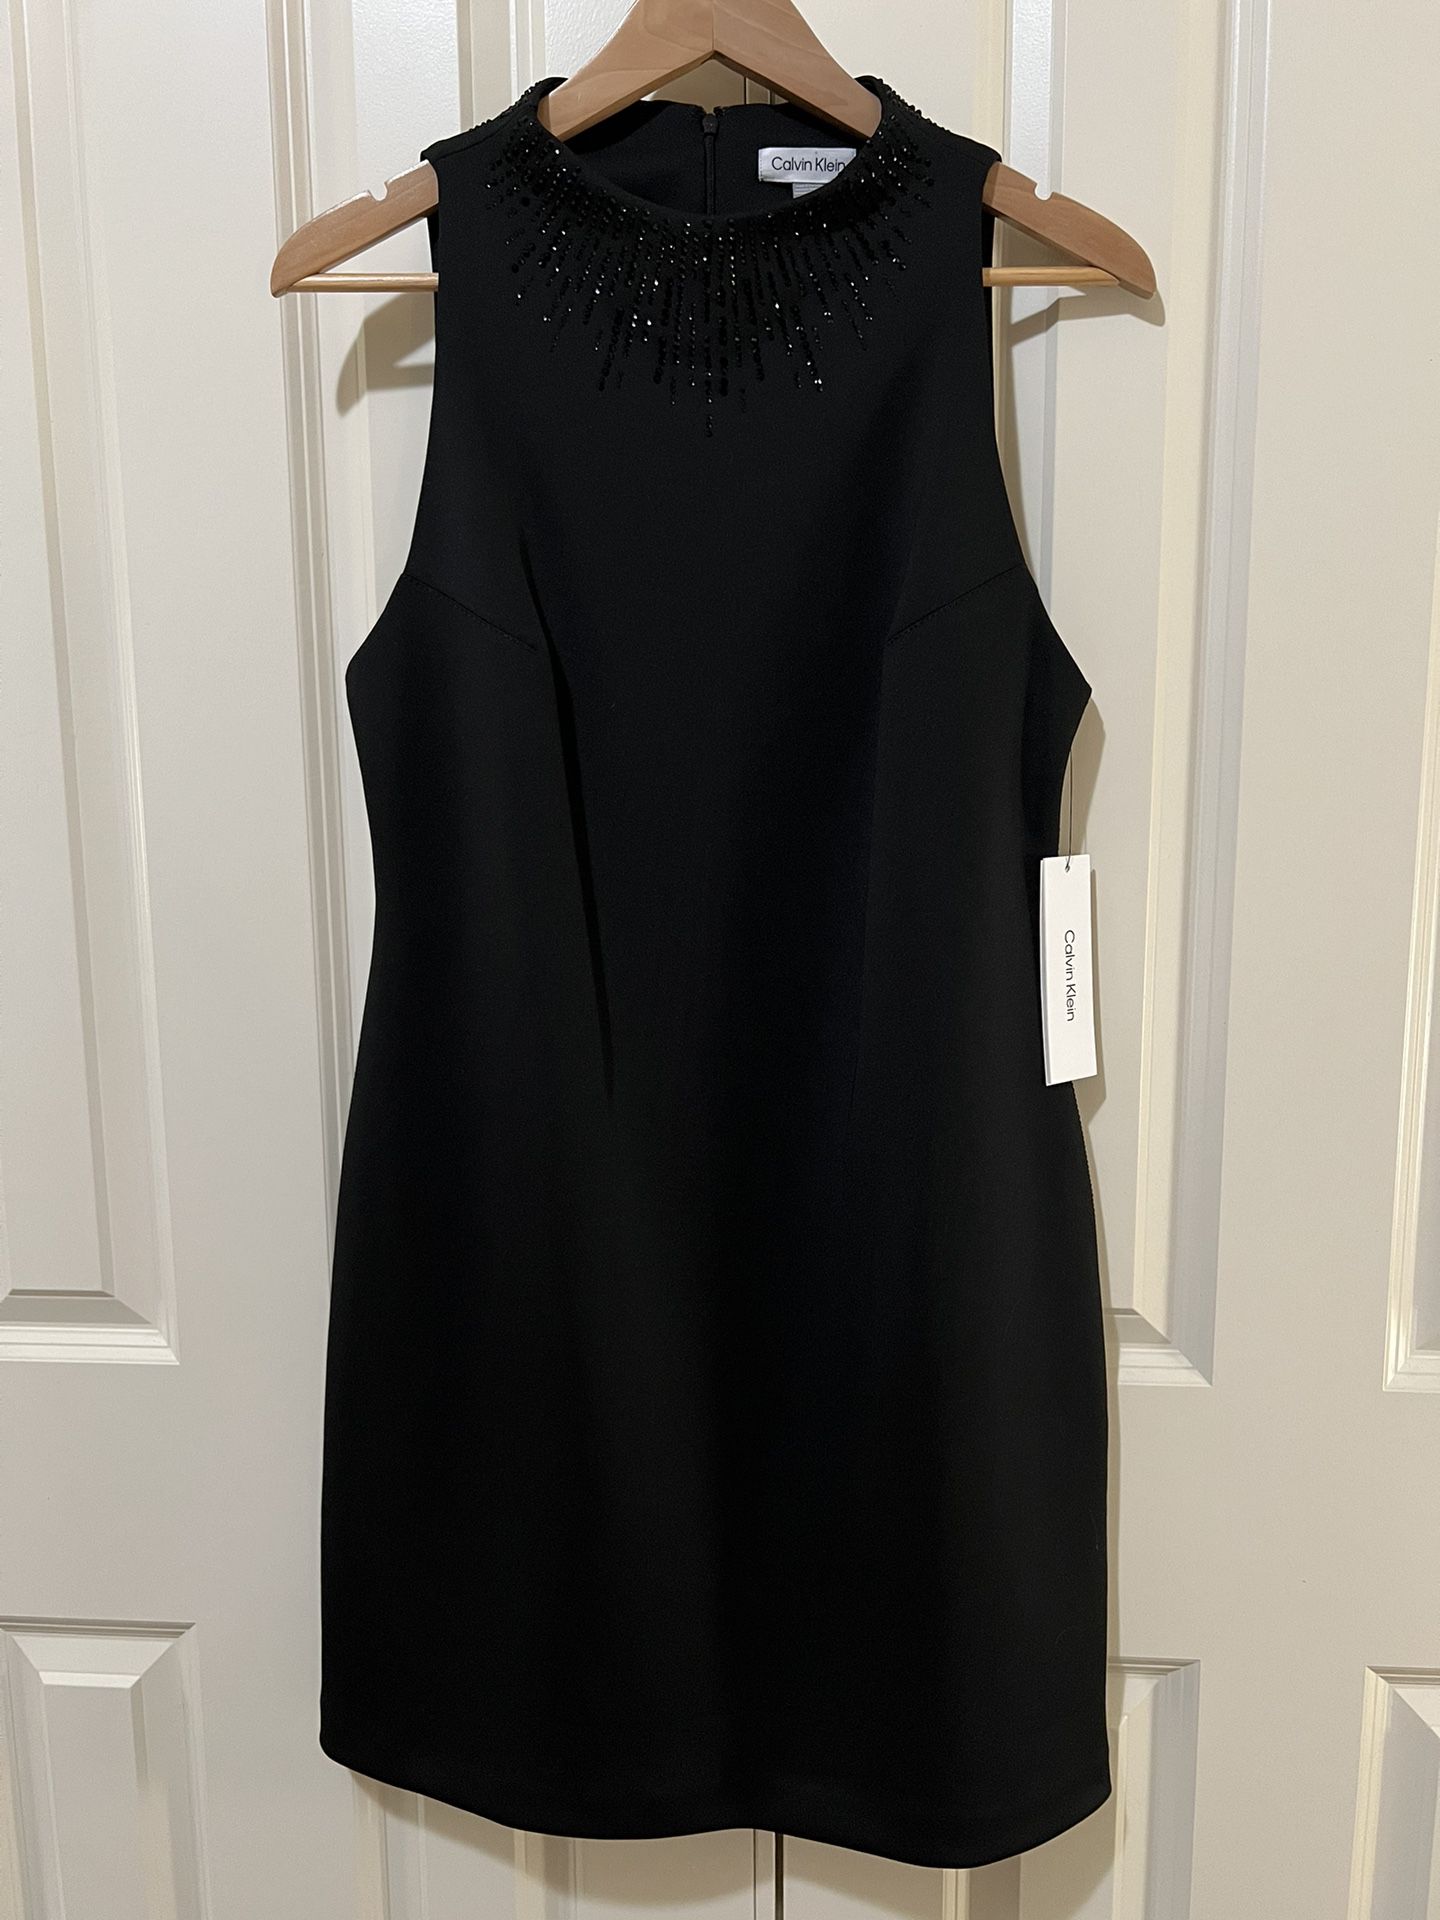 Calvin Klein Black Shift Dress with Beading; Size 10 - New with Tags!